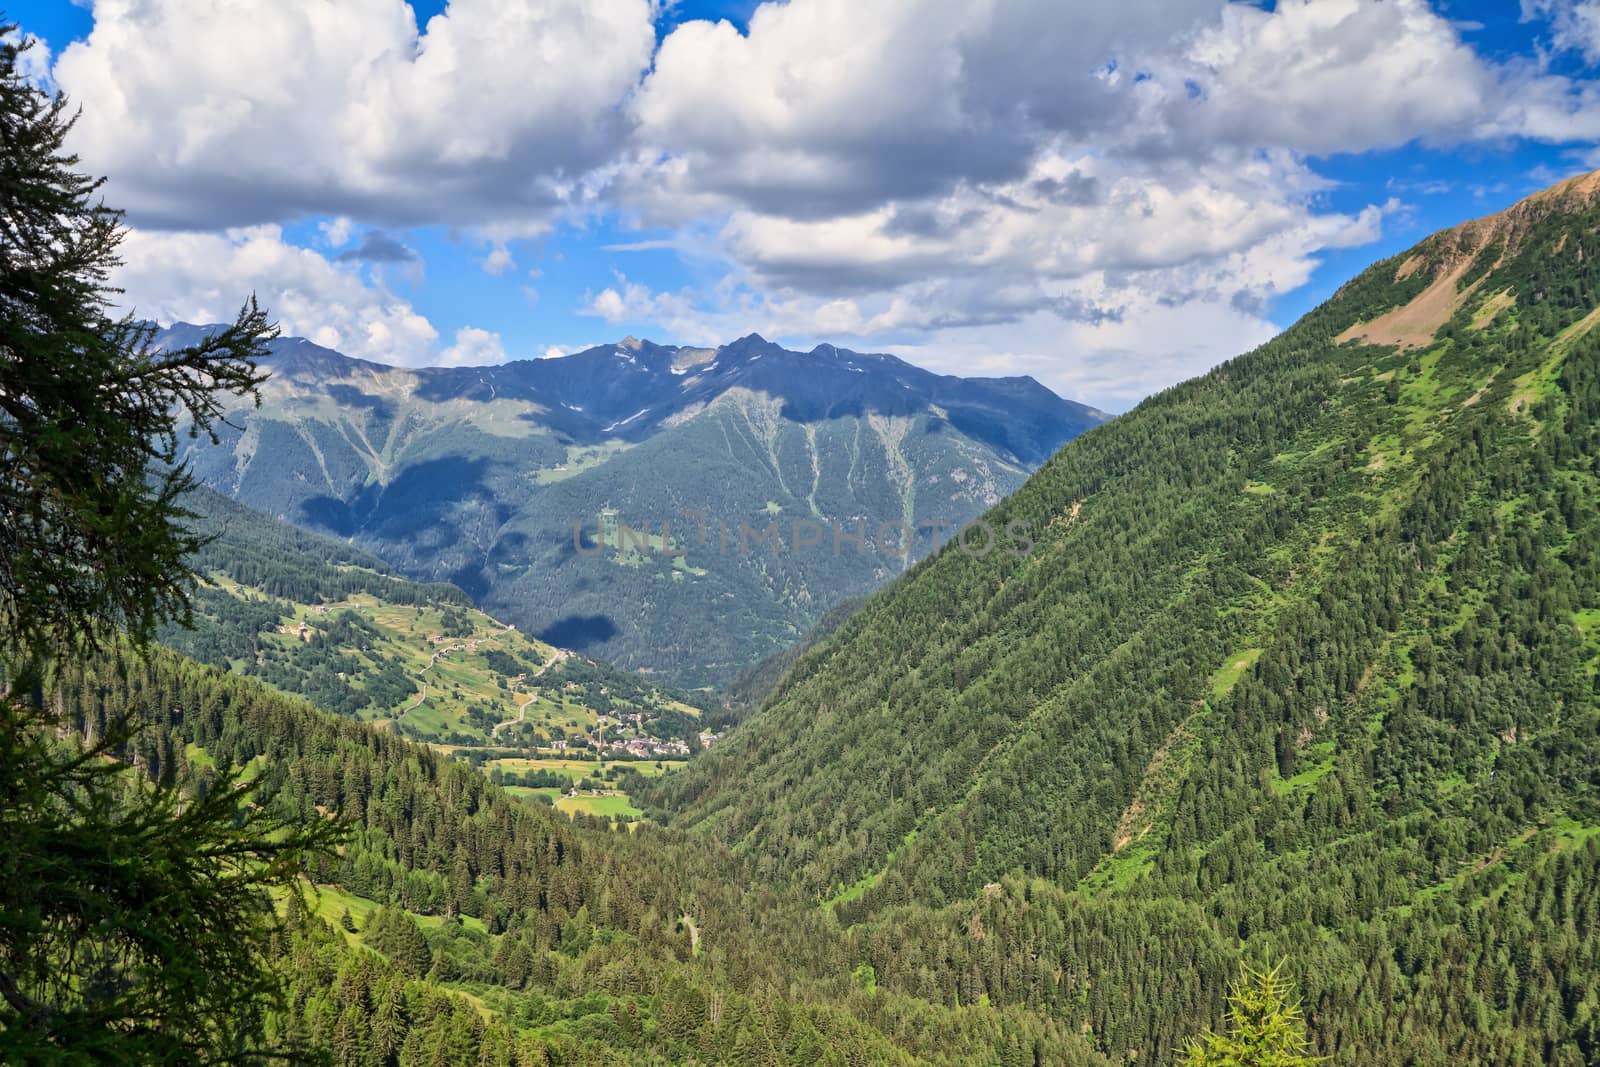 overview of Pejo Valley in Val di Sole, Trentino, Italy